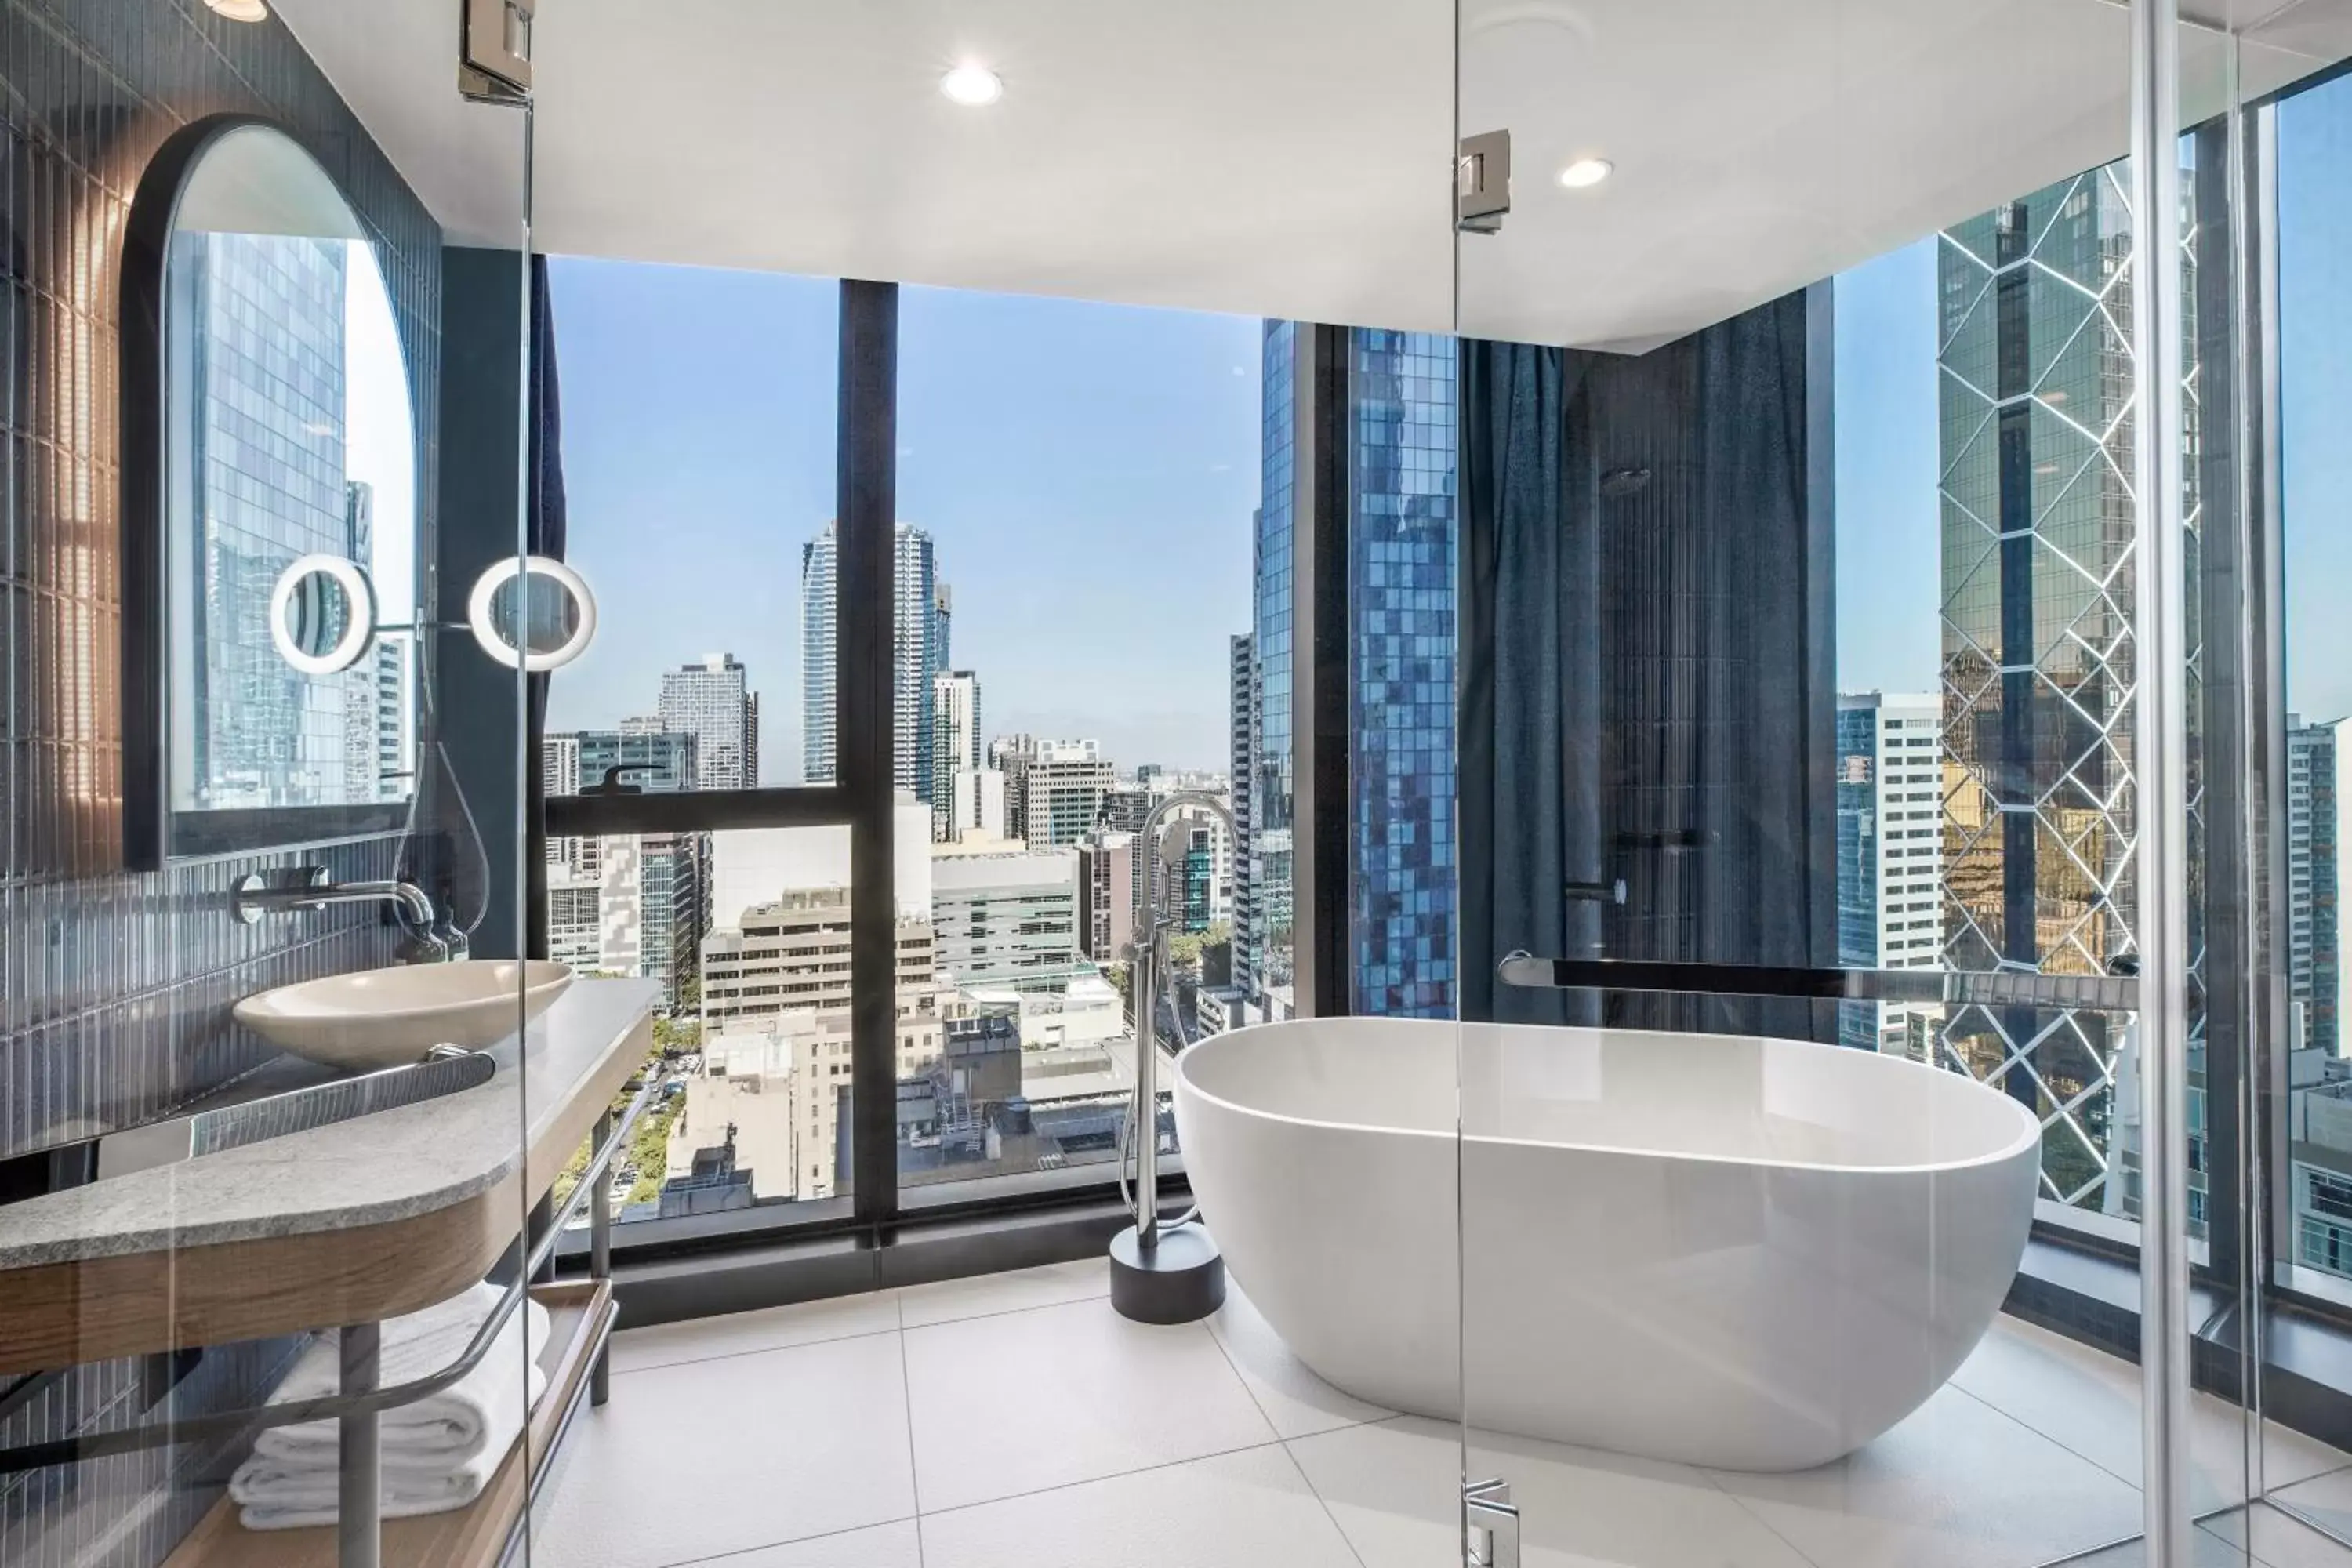 Premium King Room with Tub - High Floor in voco Melbourne Central